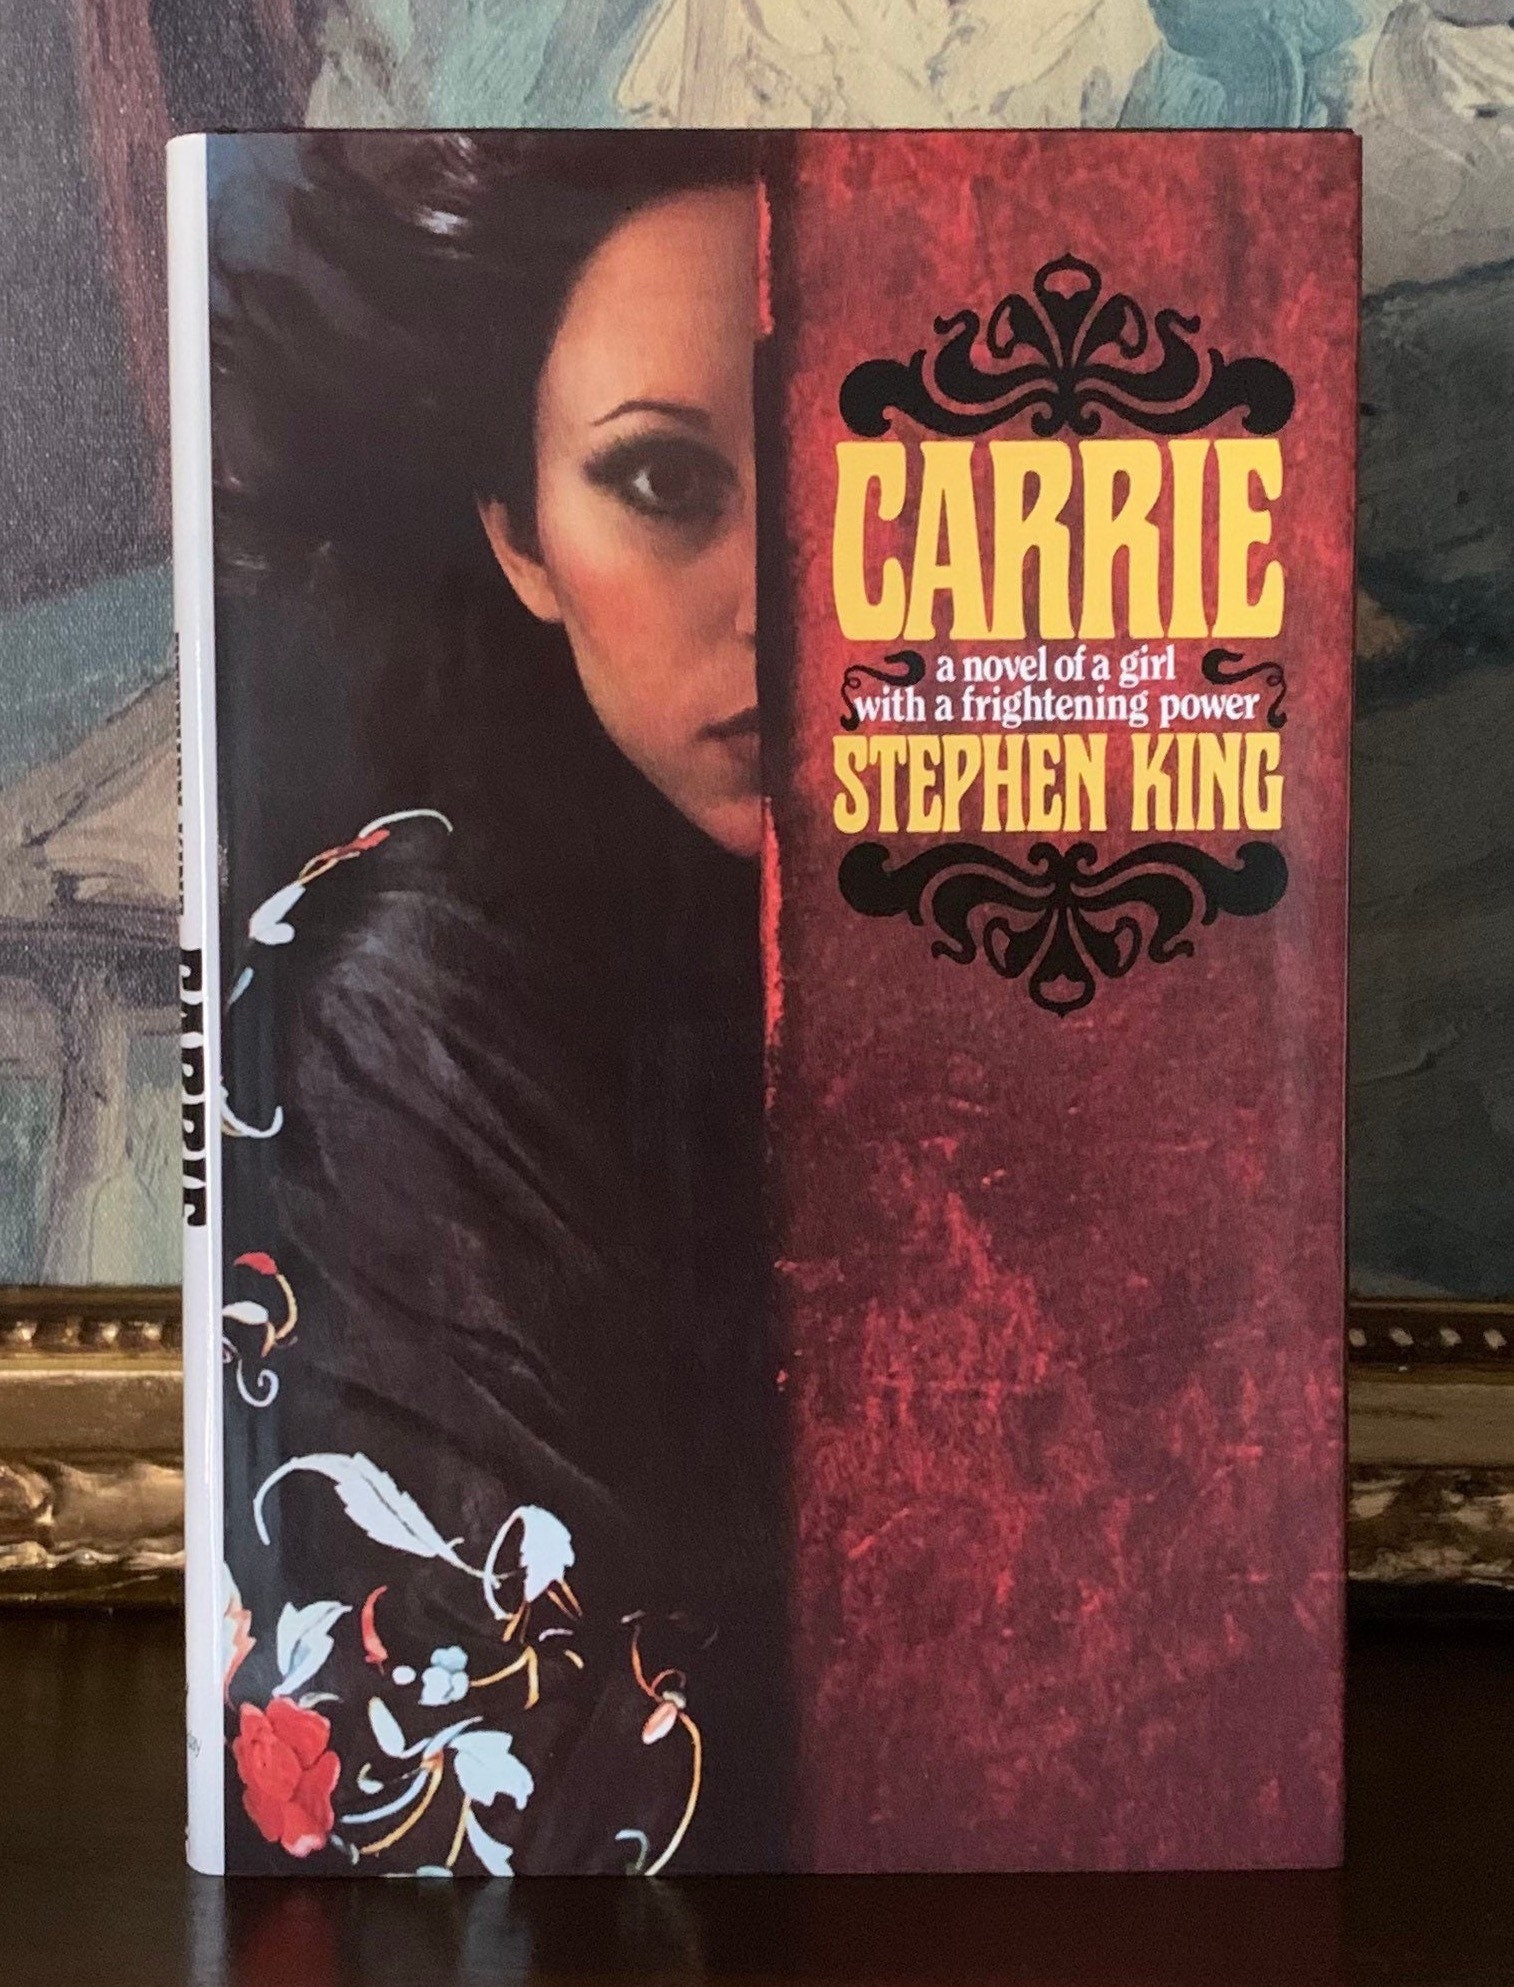 Rare Carrie by Stephen King (1974) Original Hardcover Book Club Edition